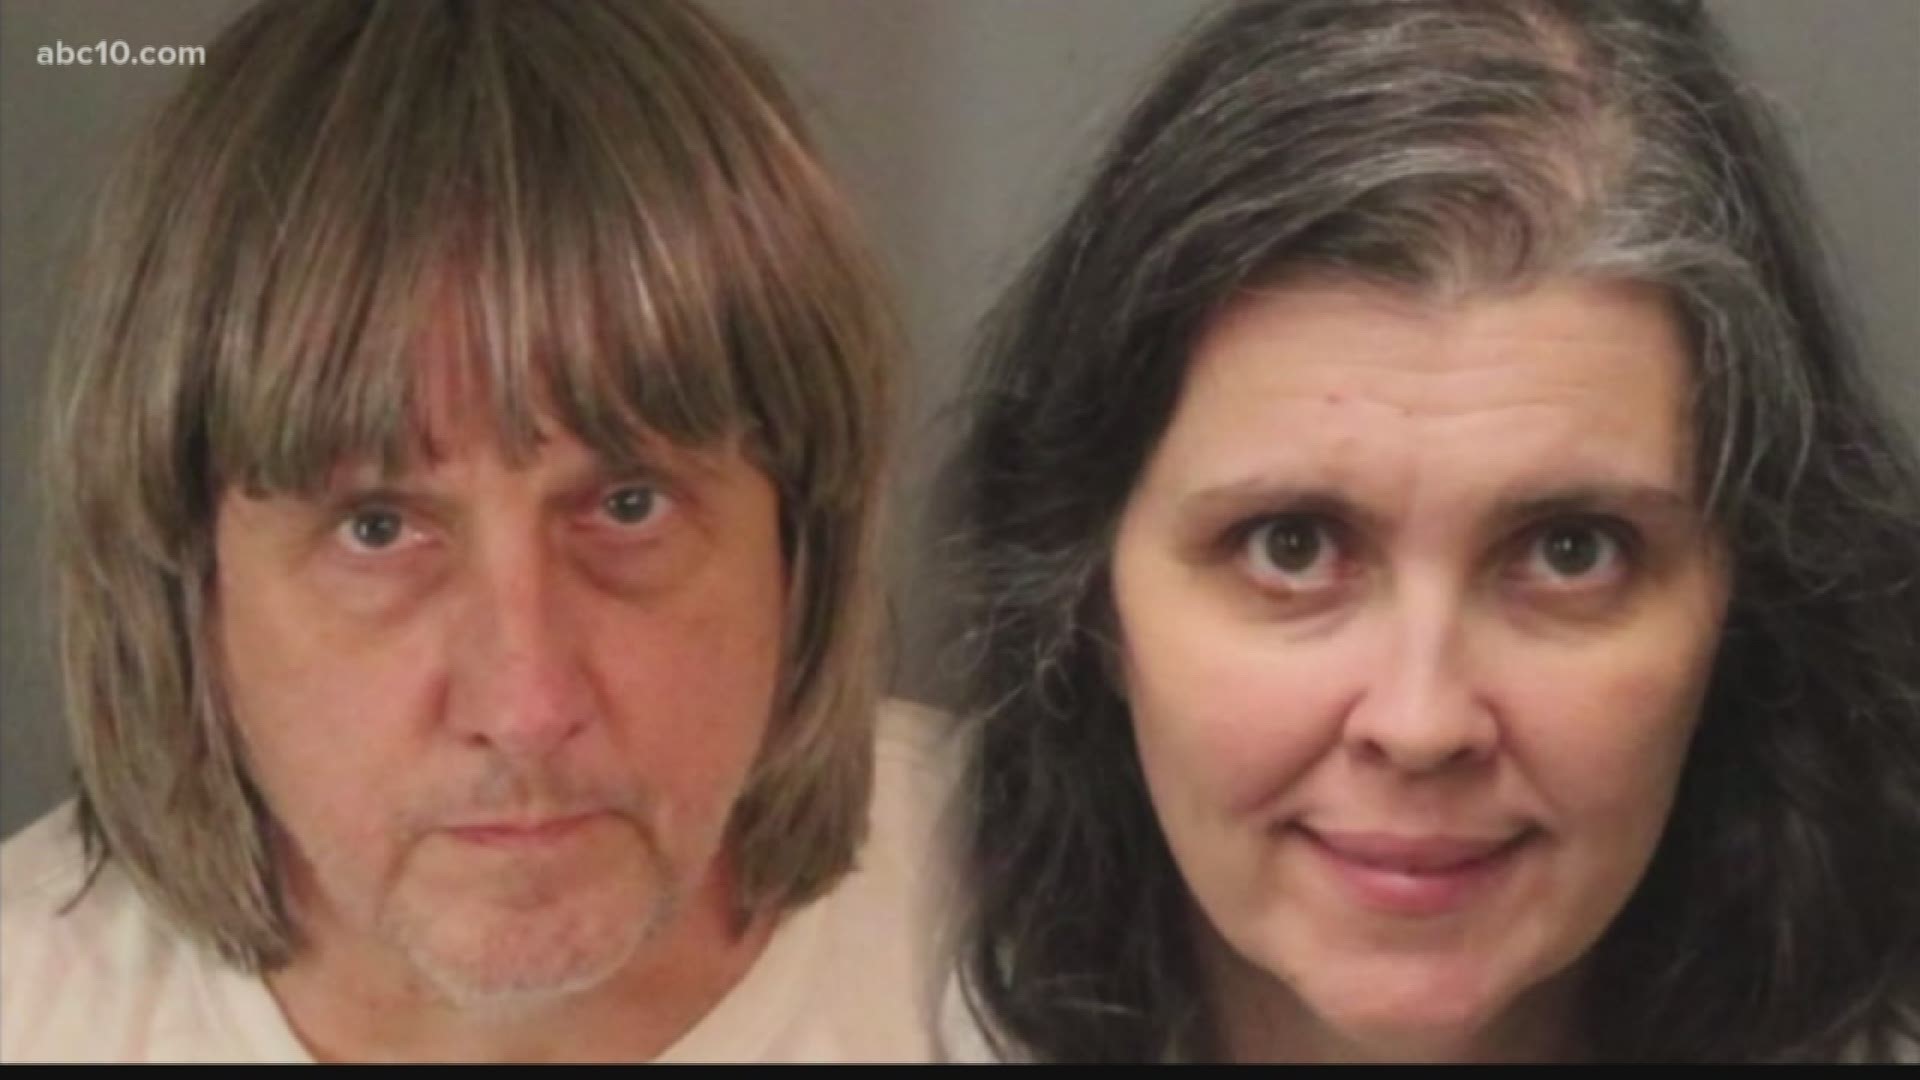 Authorities in Riverside County, Calif. say that a husband and wife are in custody after allegedly chaining their children to beds in filthy conditions.